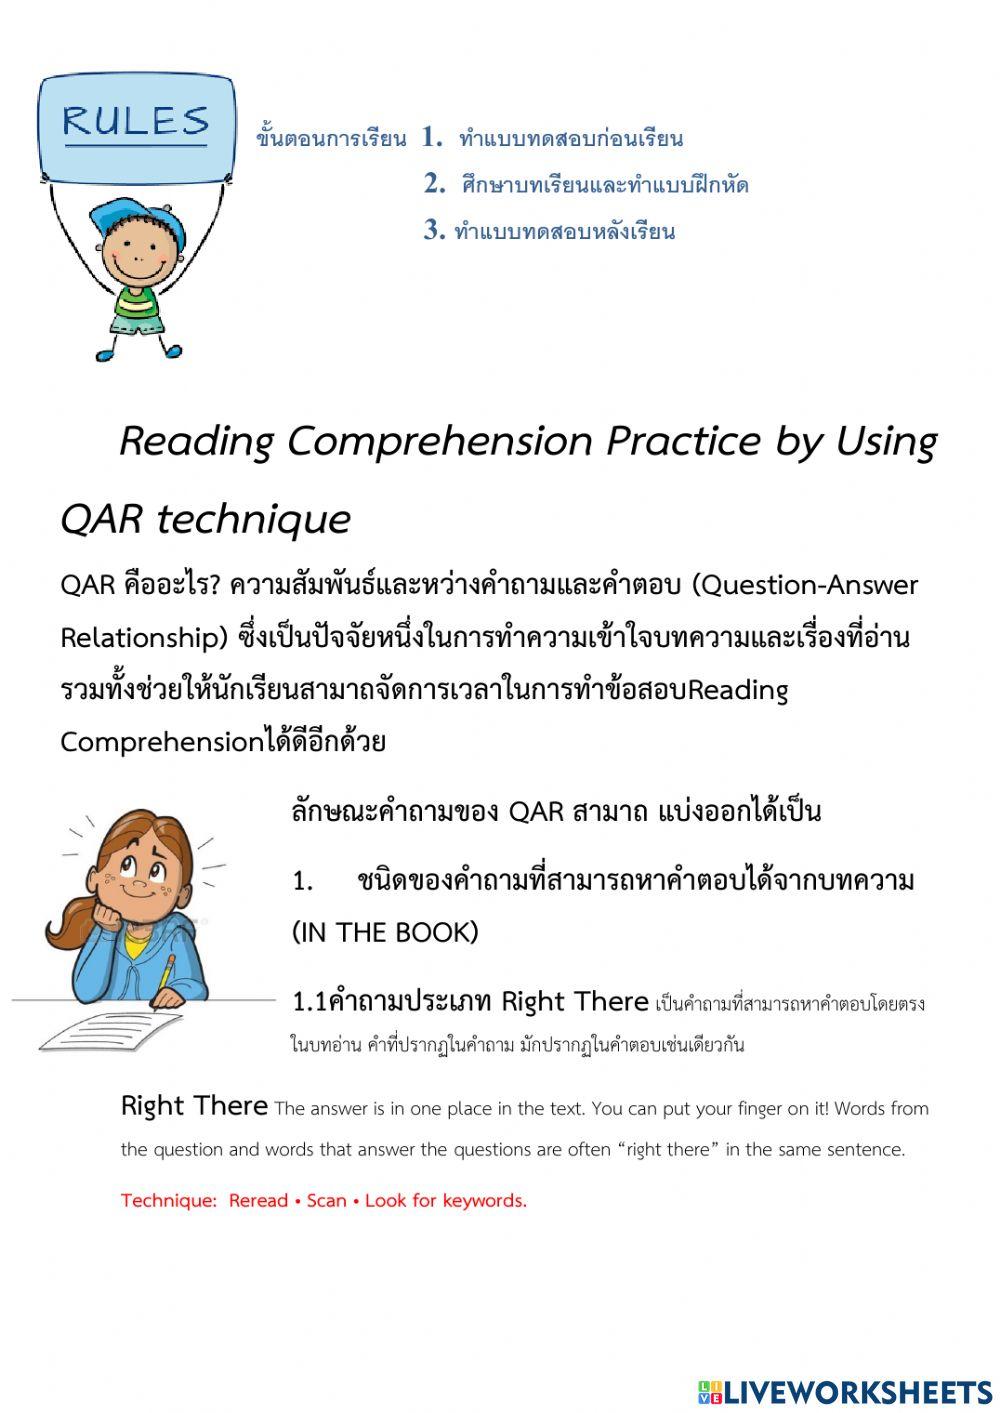 Reading Comprehension by Using QAR Technique